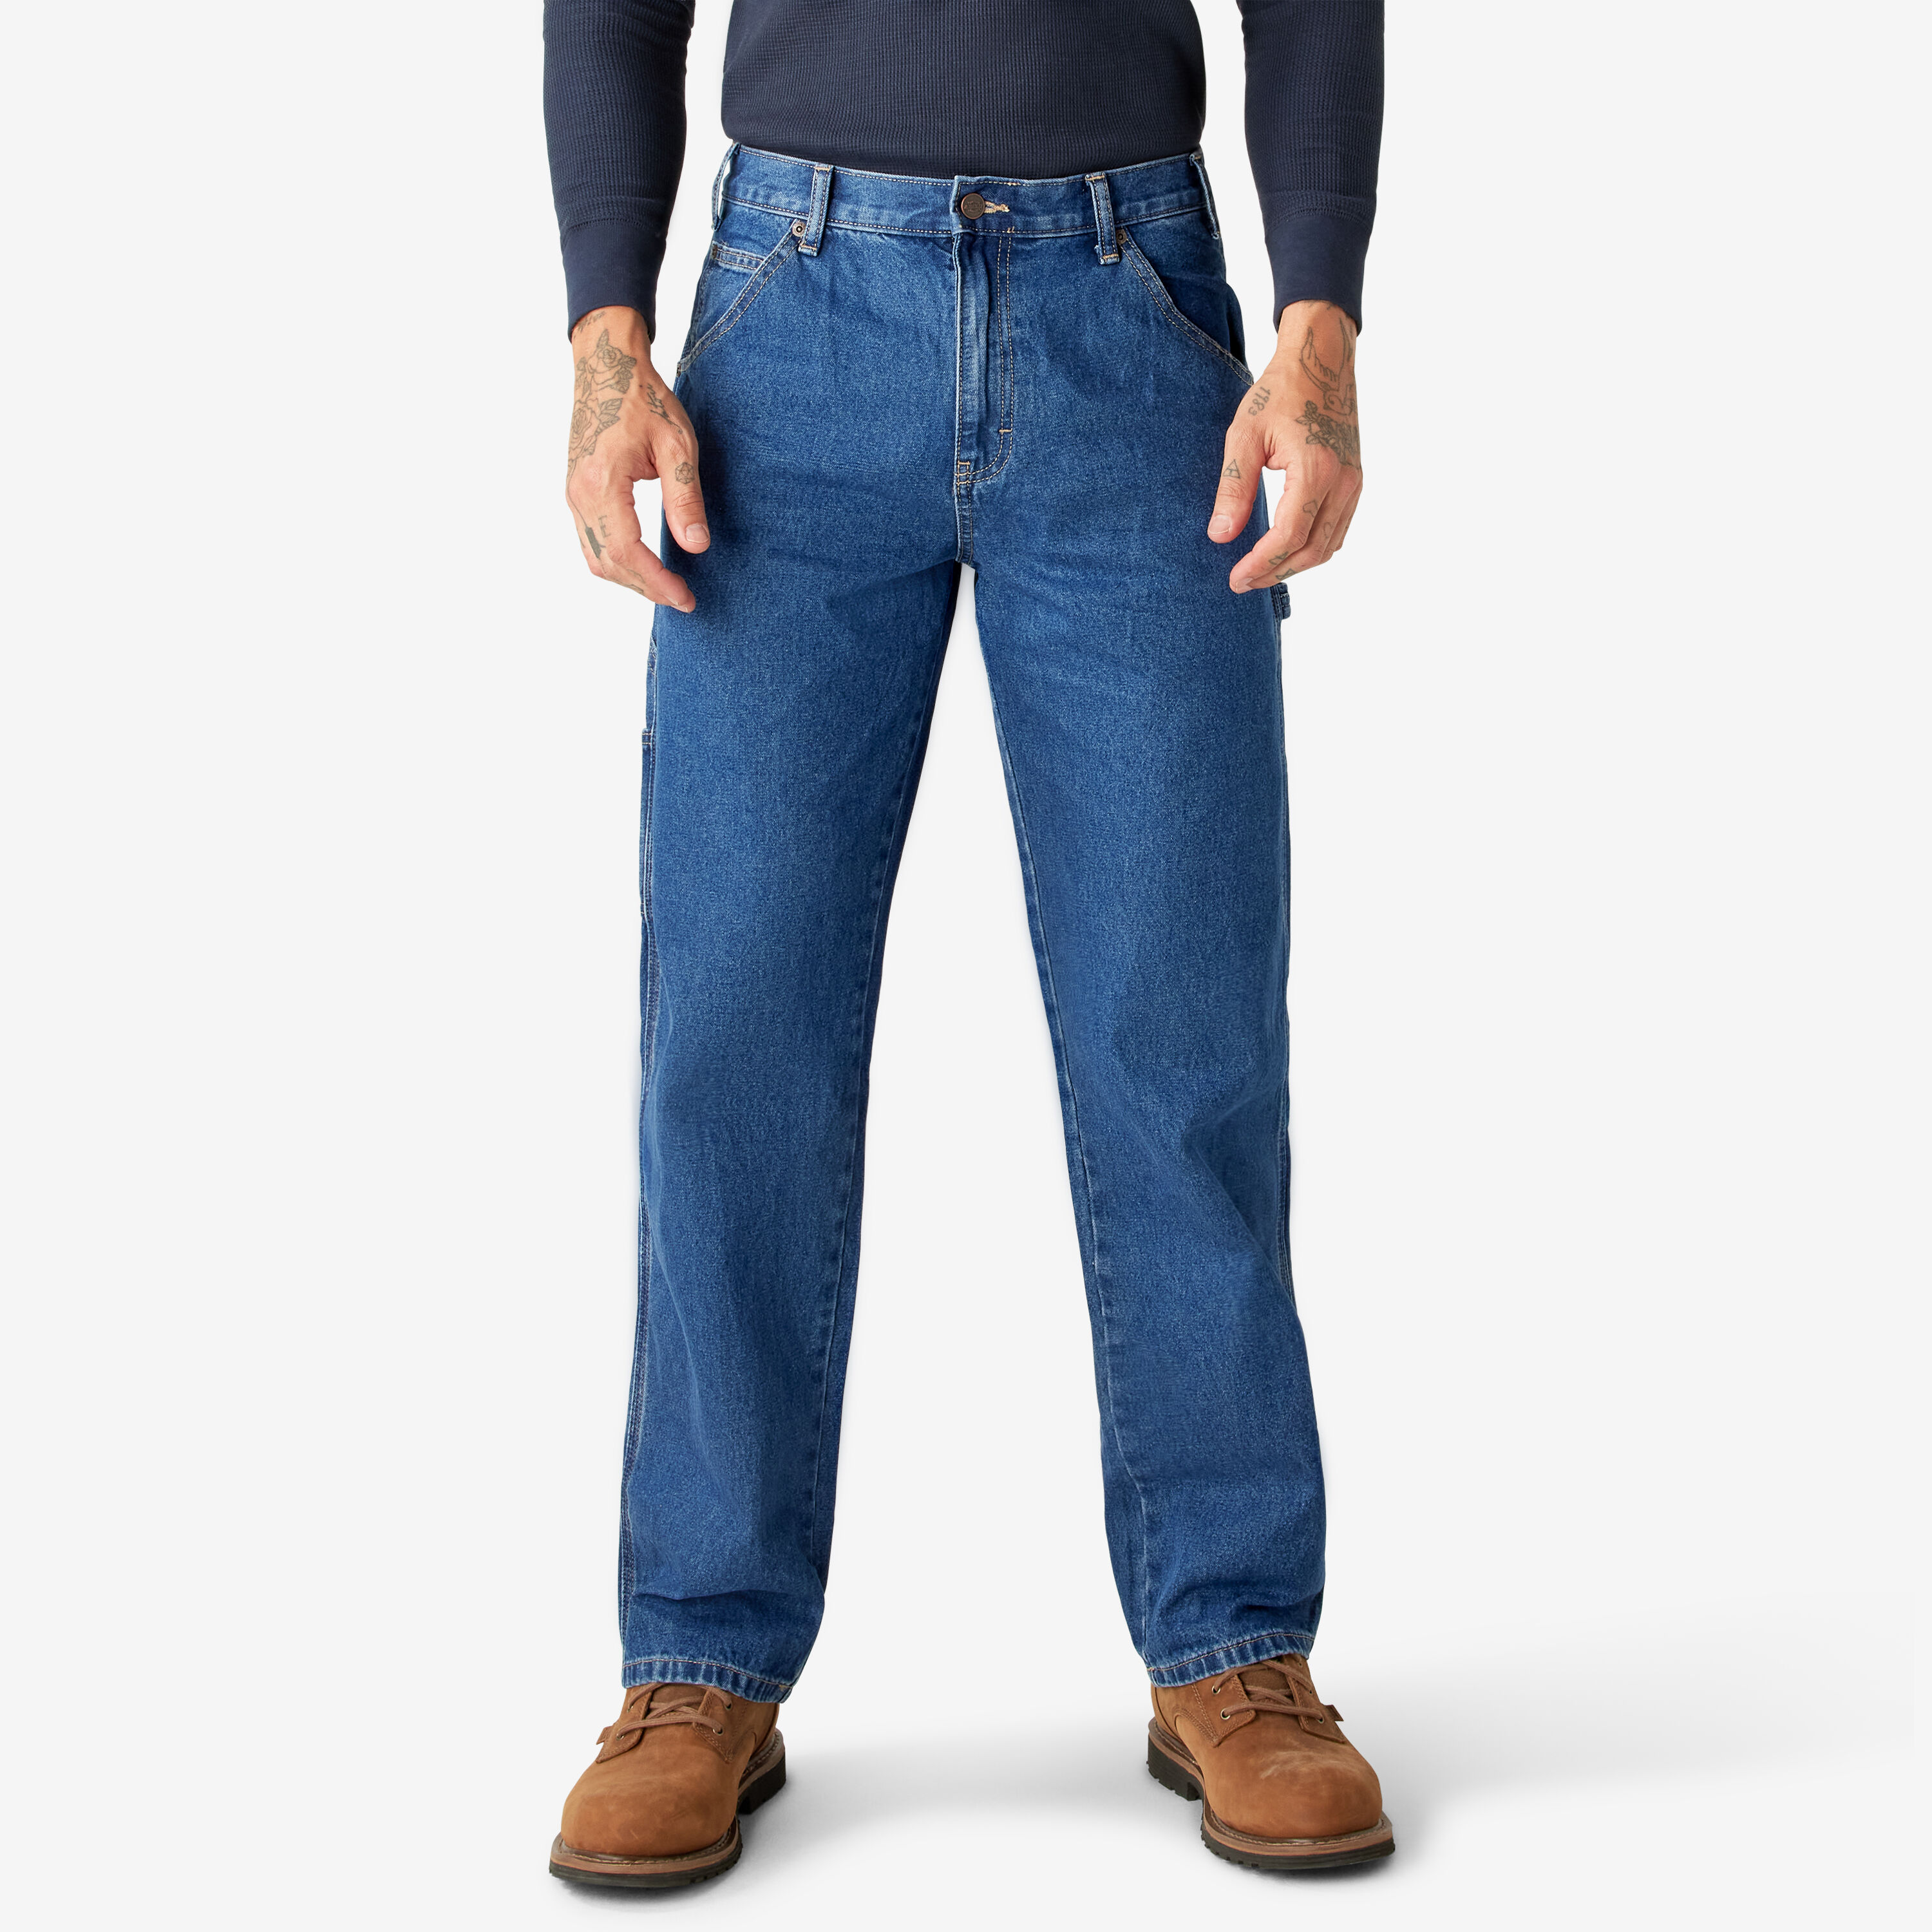 dickies relaxed fit carpenter